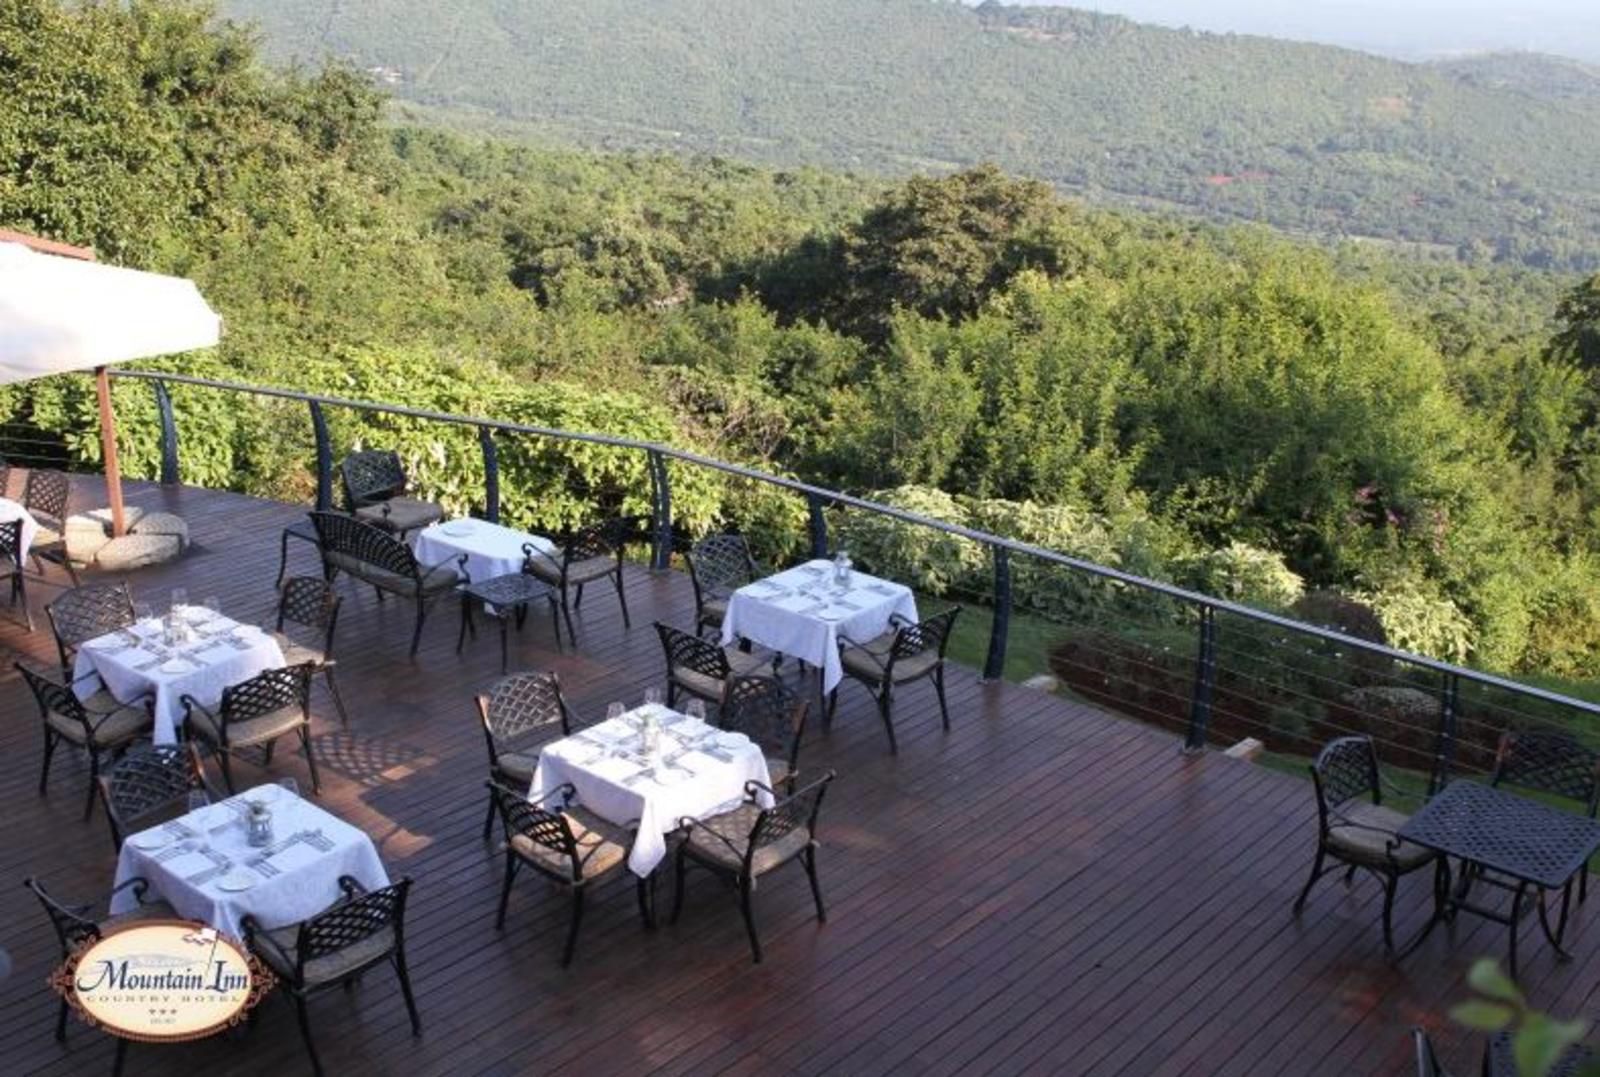 Mountain Inn Country Hotel Makhado Louis Trichardt Limpopo Province South Africa Place Cover, Food